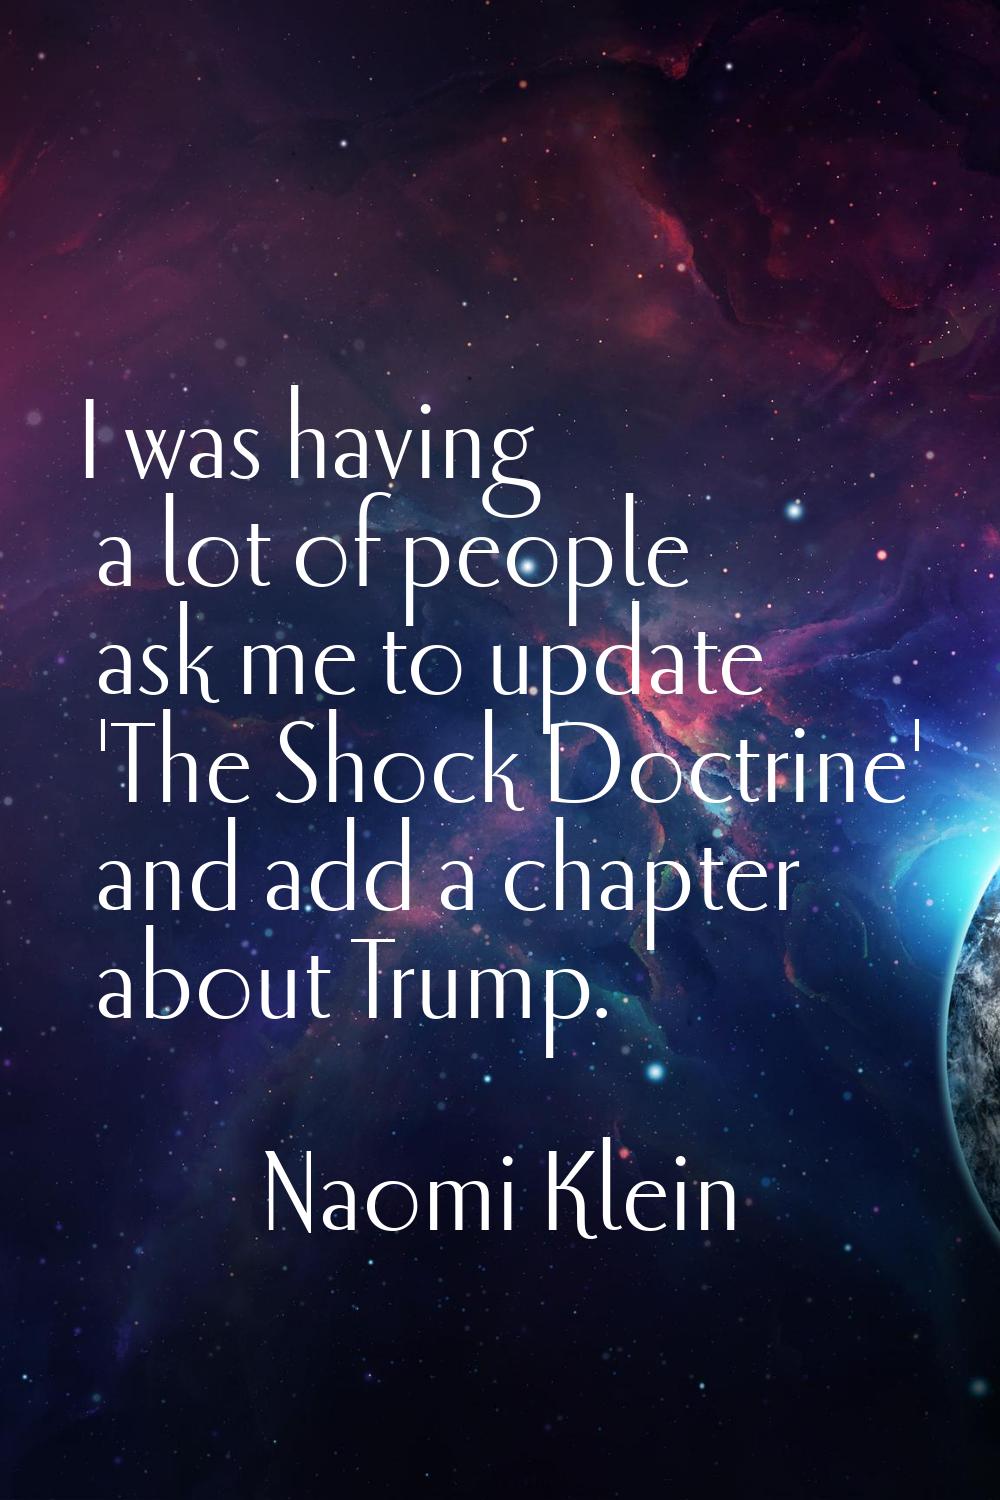 I was having a lot of people ask me to update 'The Shock Doctrine' and add a chapter about Trump.